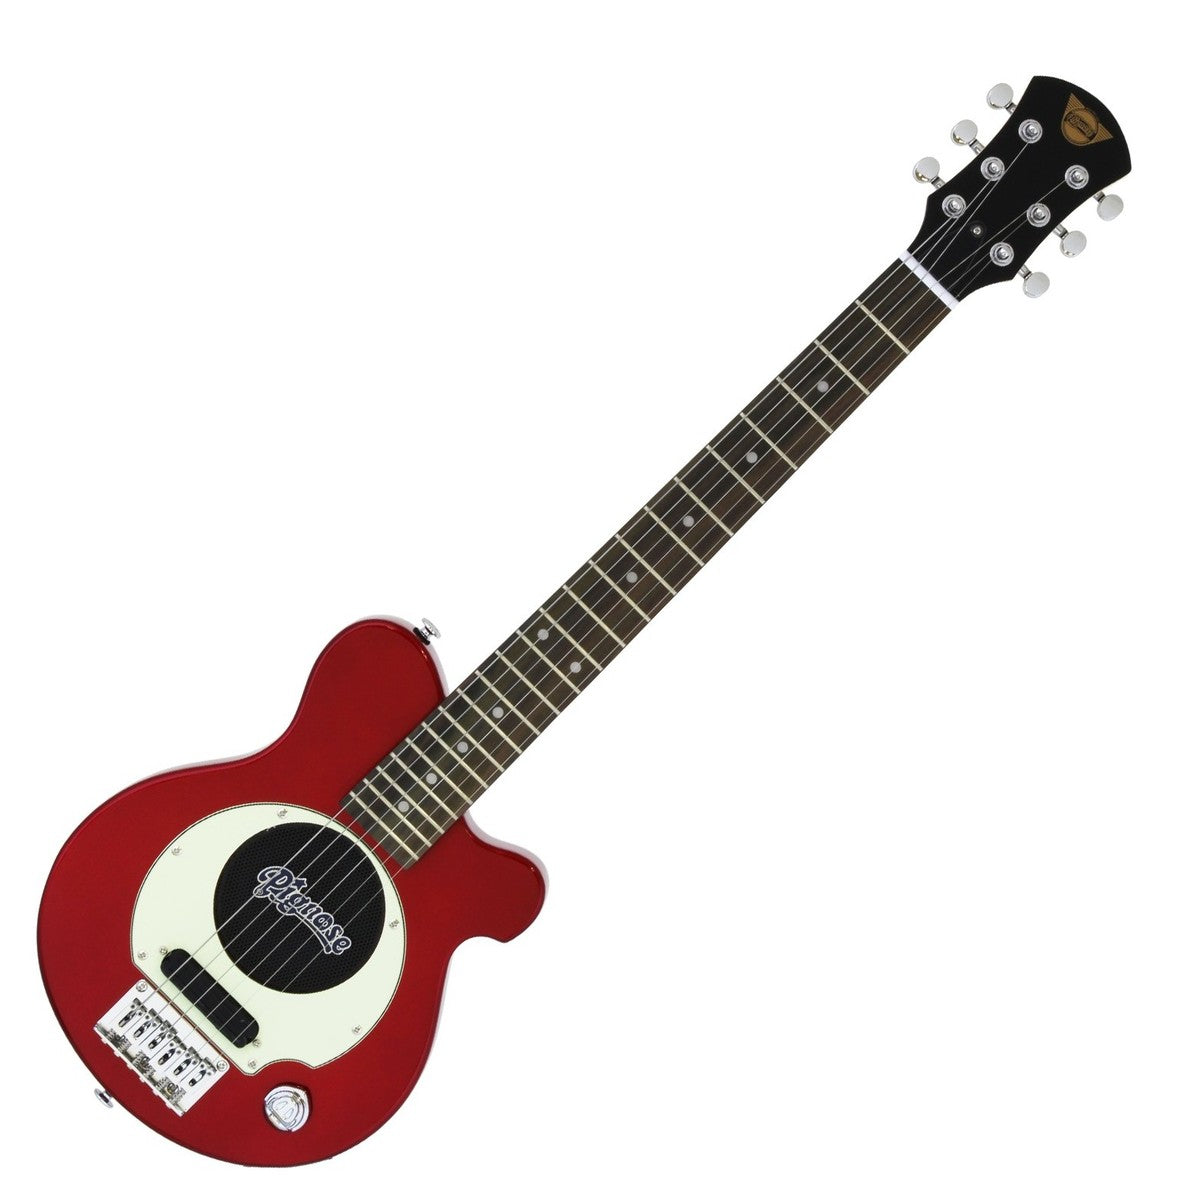 Aria Pignose PGG-200 Electric Guitar - Candy Apple Red